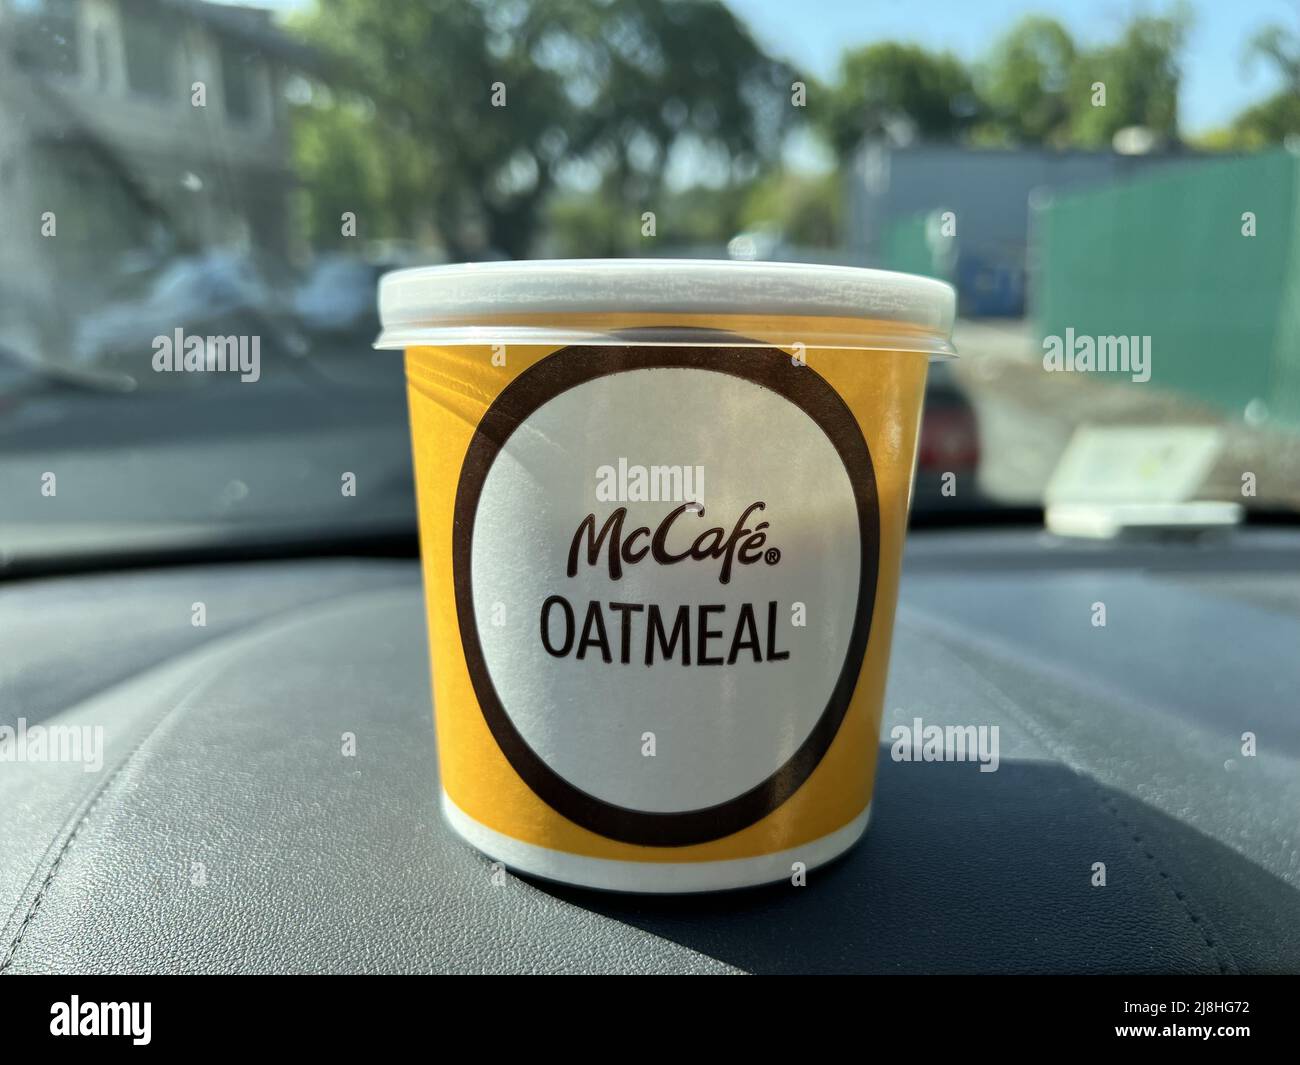 Close-up of container of McCafe Oatmeal, a breakfast item from McDonald's restaurant, Lafayette, California, April 26, 2022. Photo courtesy Sftm. Stock Photo